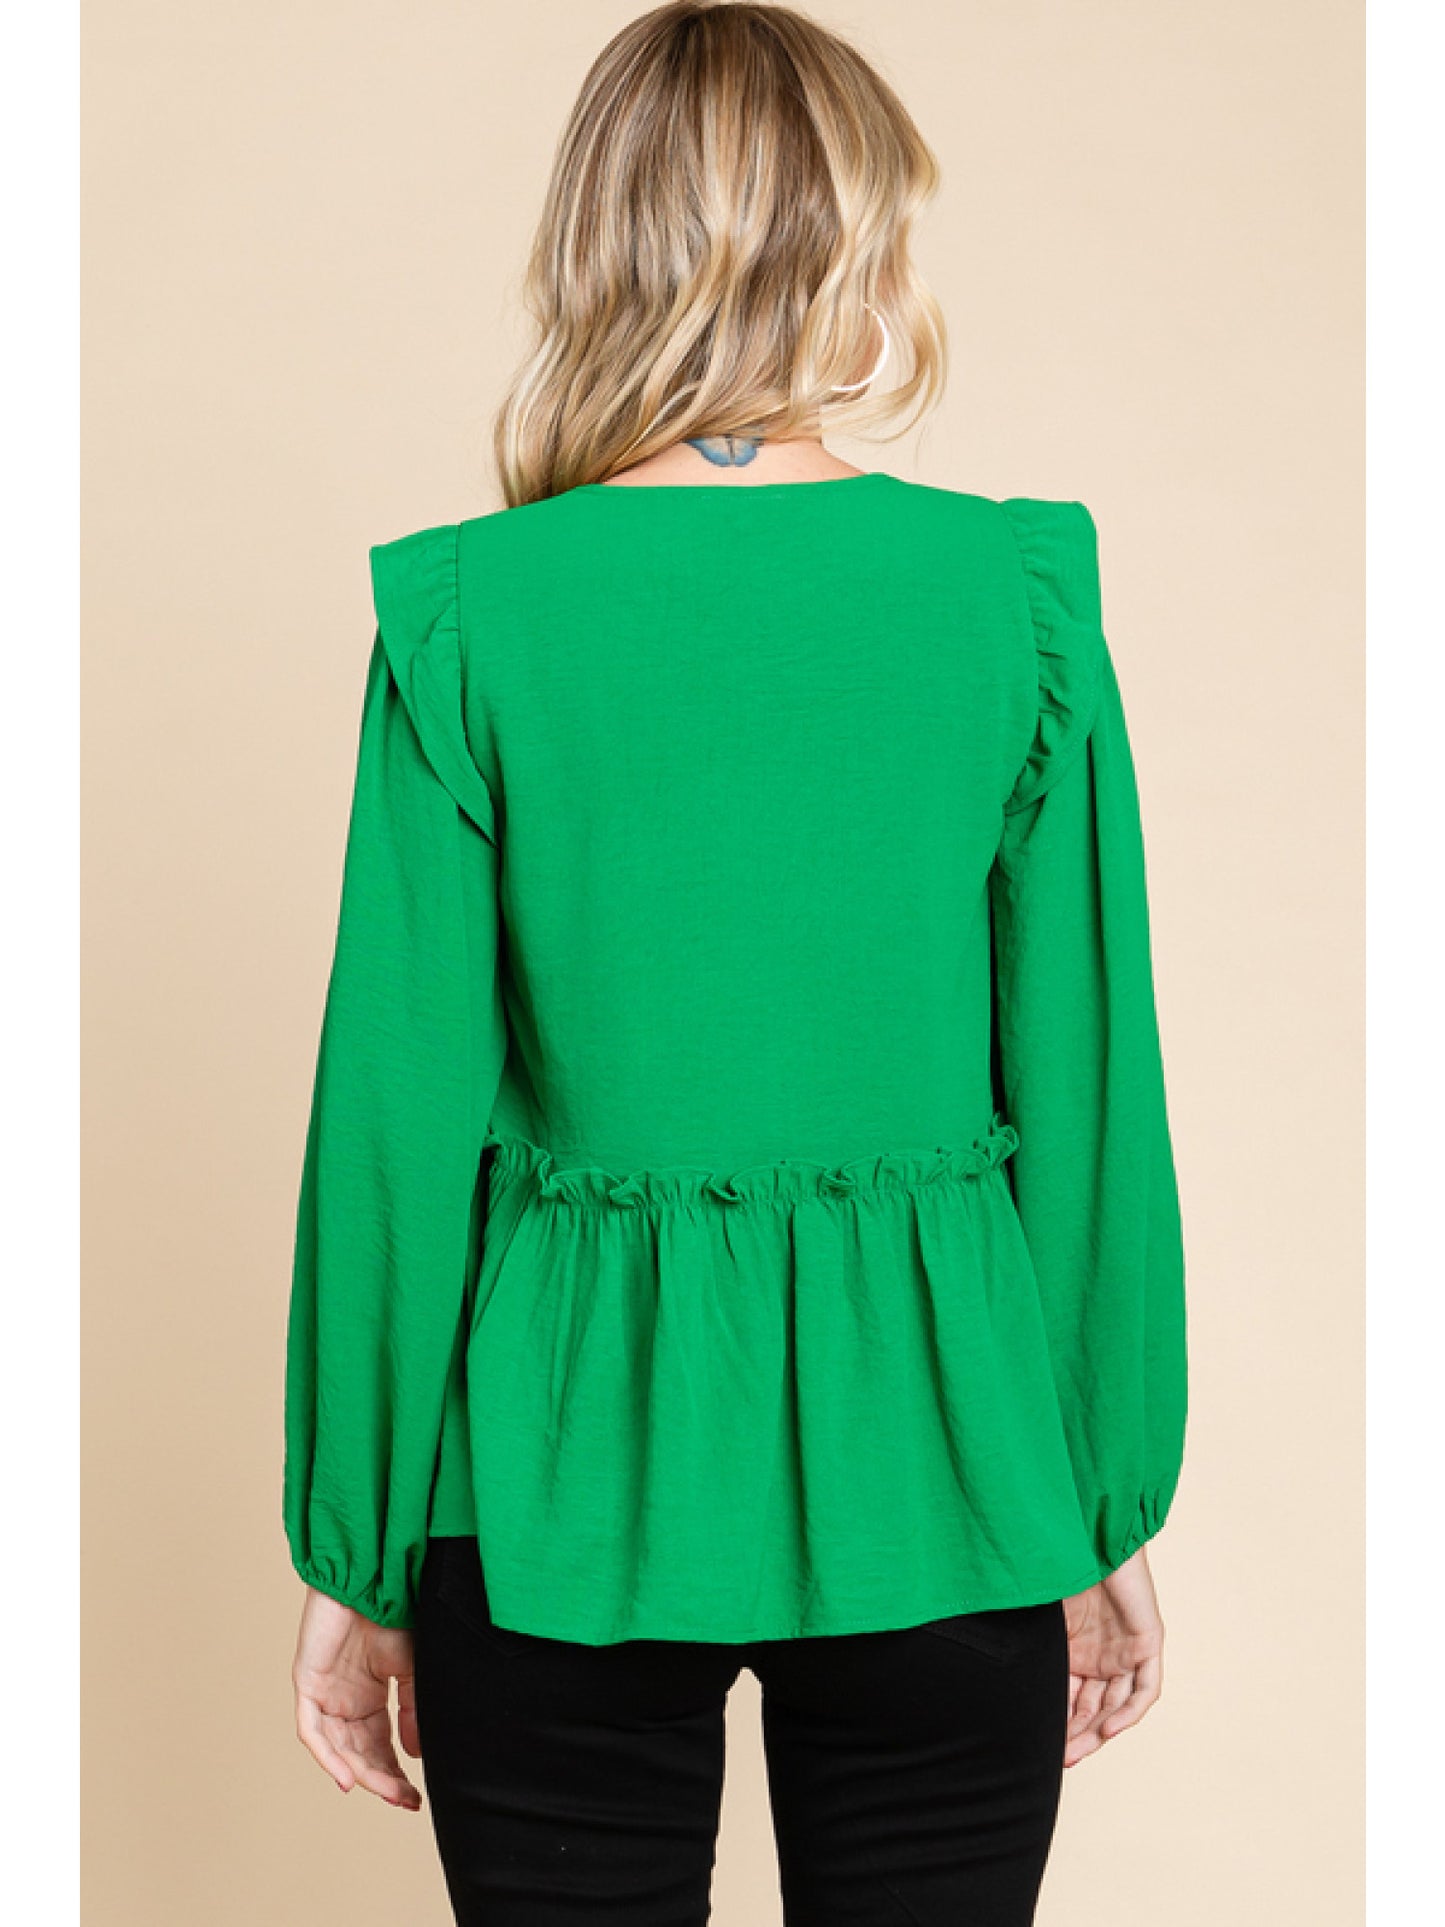 Everyday Kelly Green Baby Doll Top